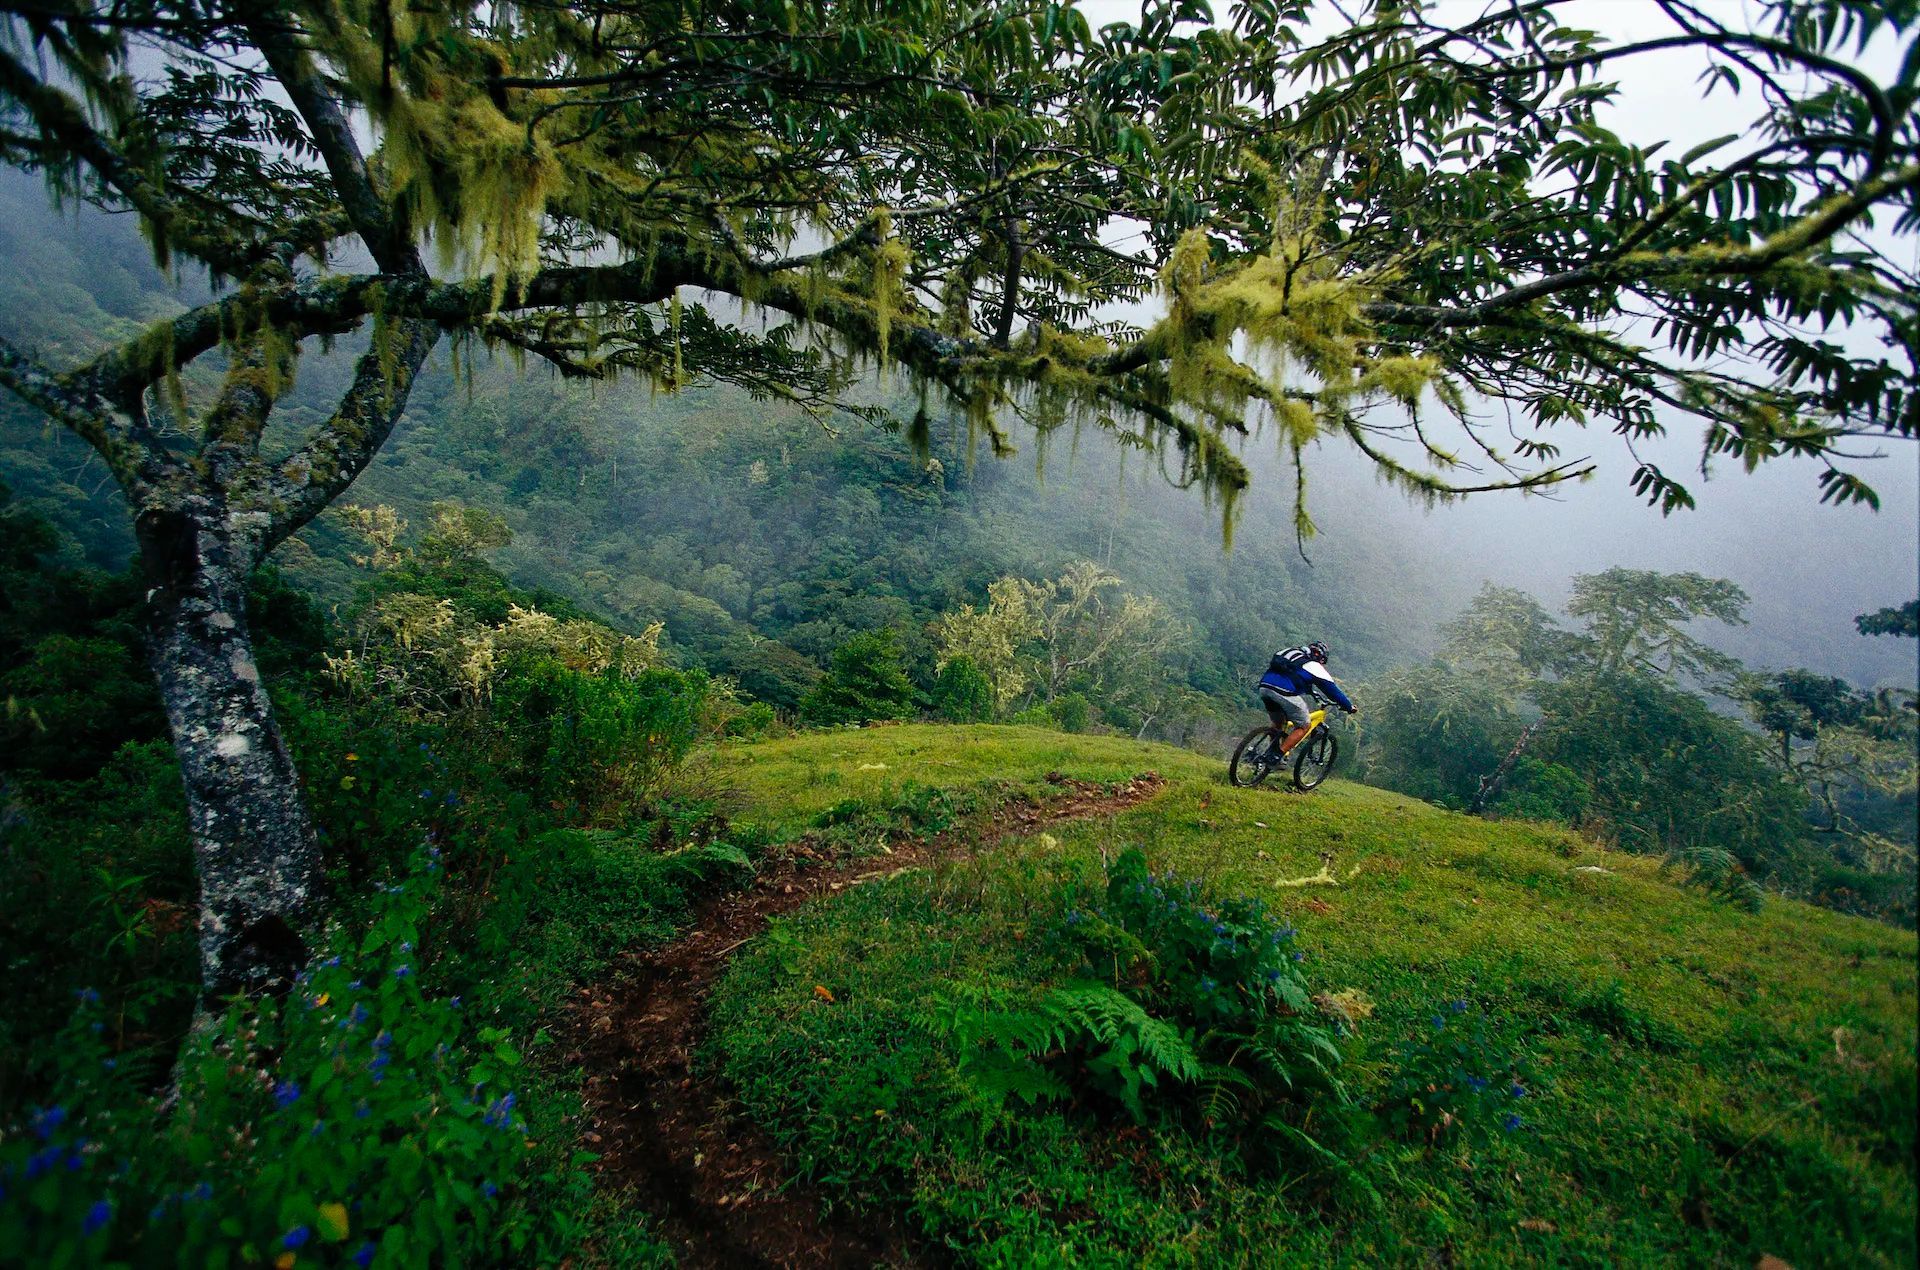 A cyclist on a trail in Costa Rica's rainforest.